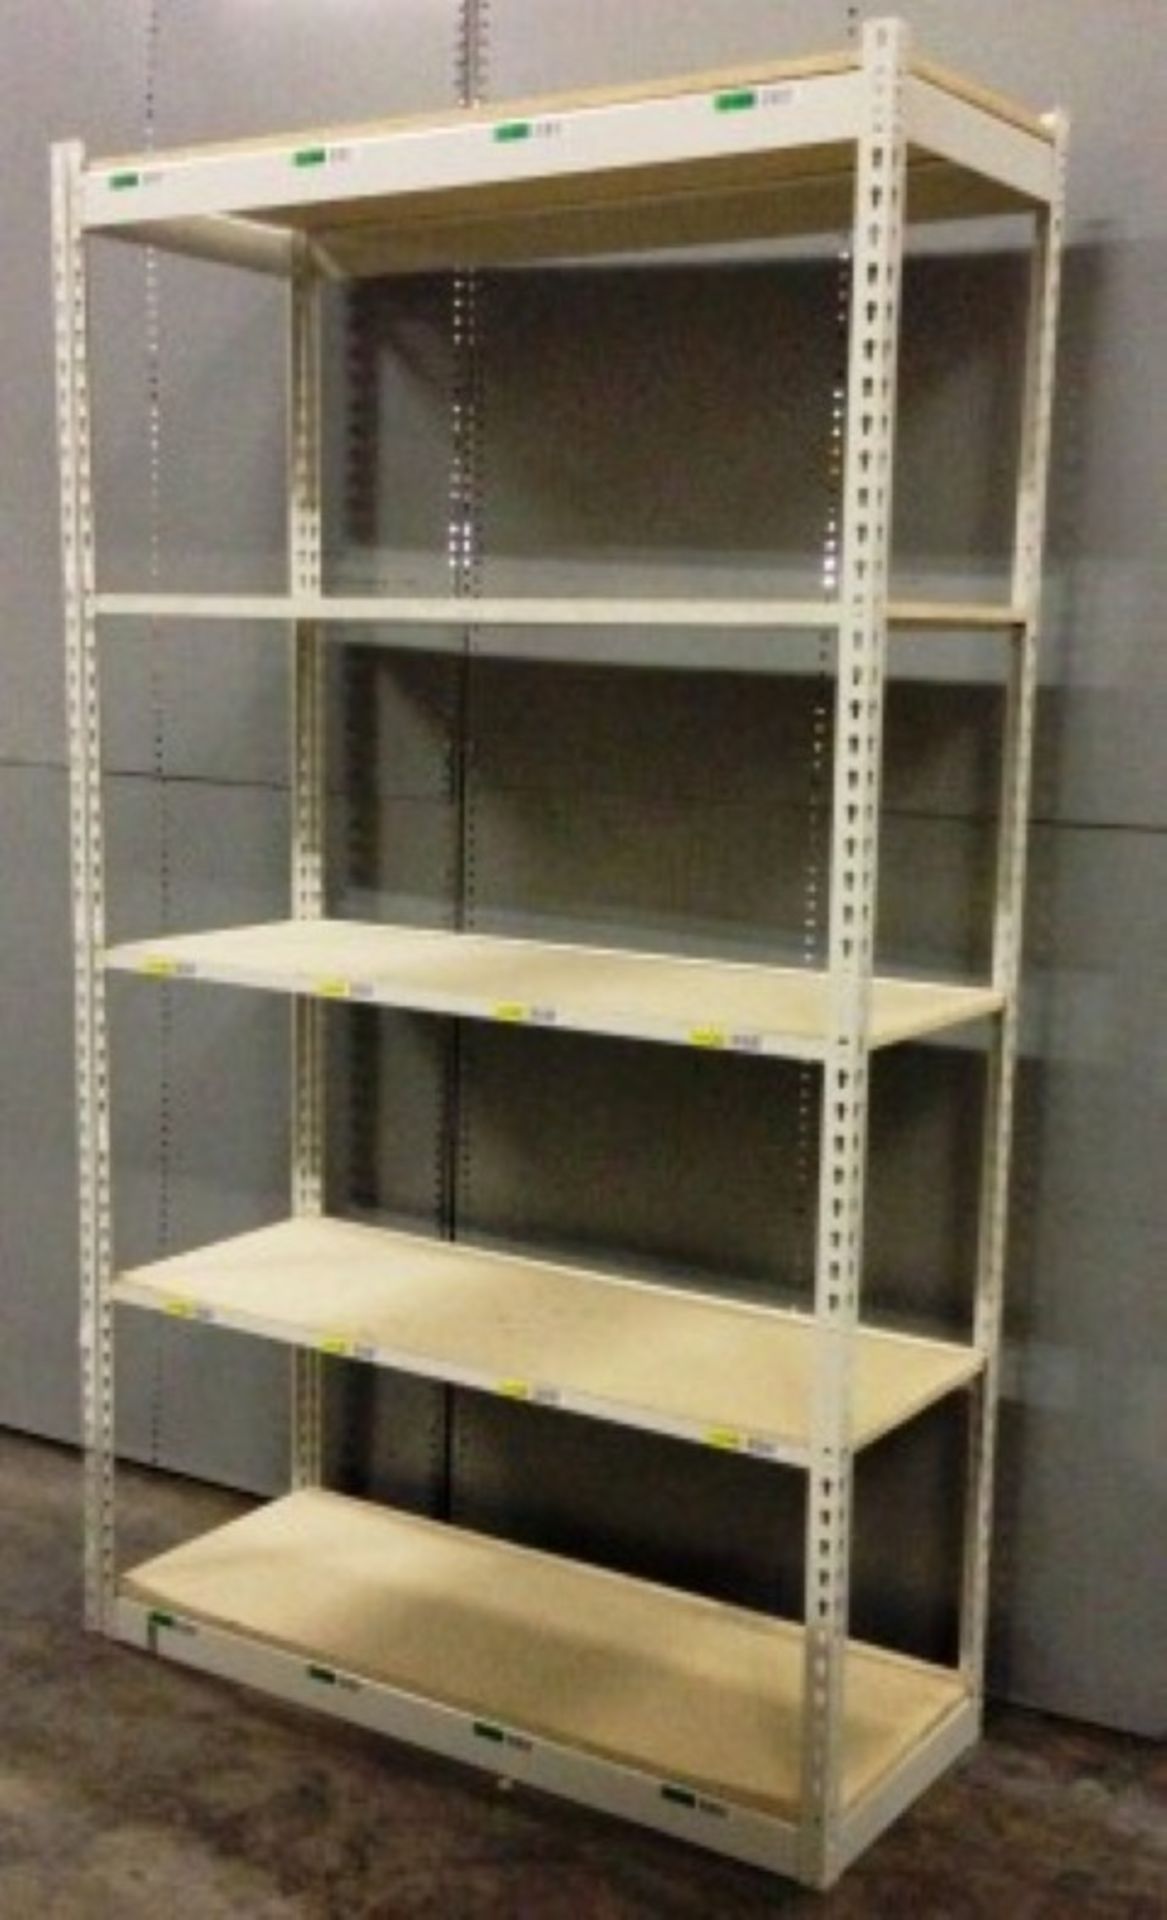 ONE LOT OF 30 SECTIONS OF RIVETIER INDUSTRIAL SHELVING,